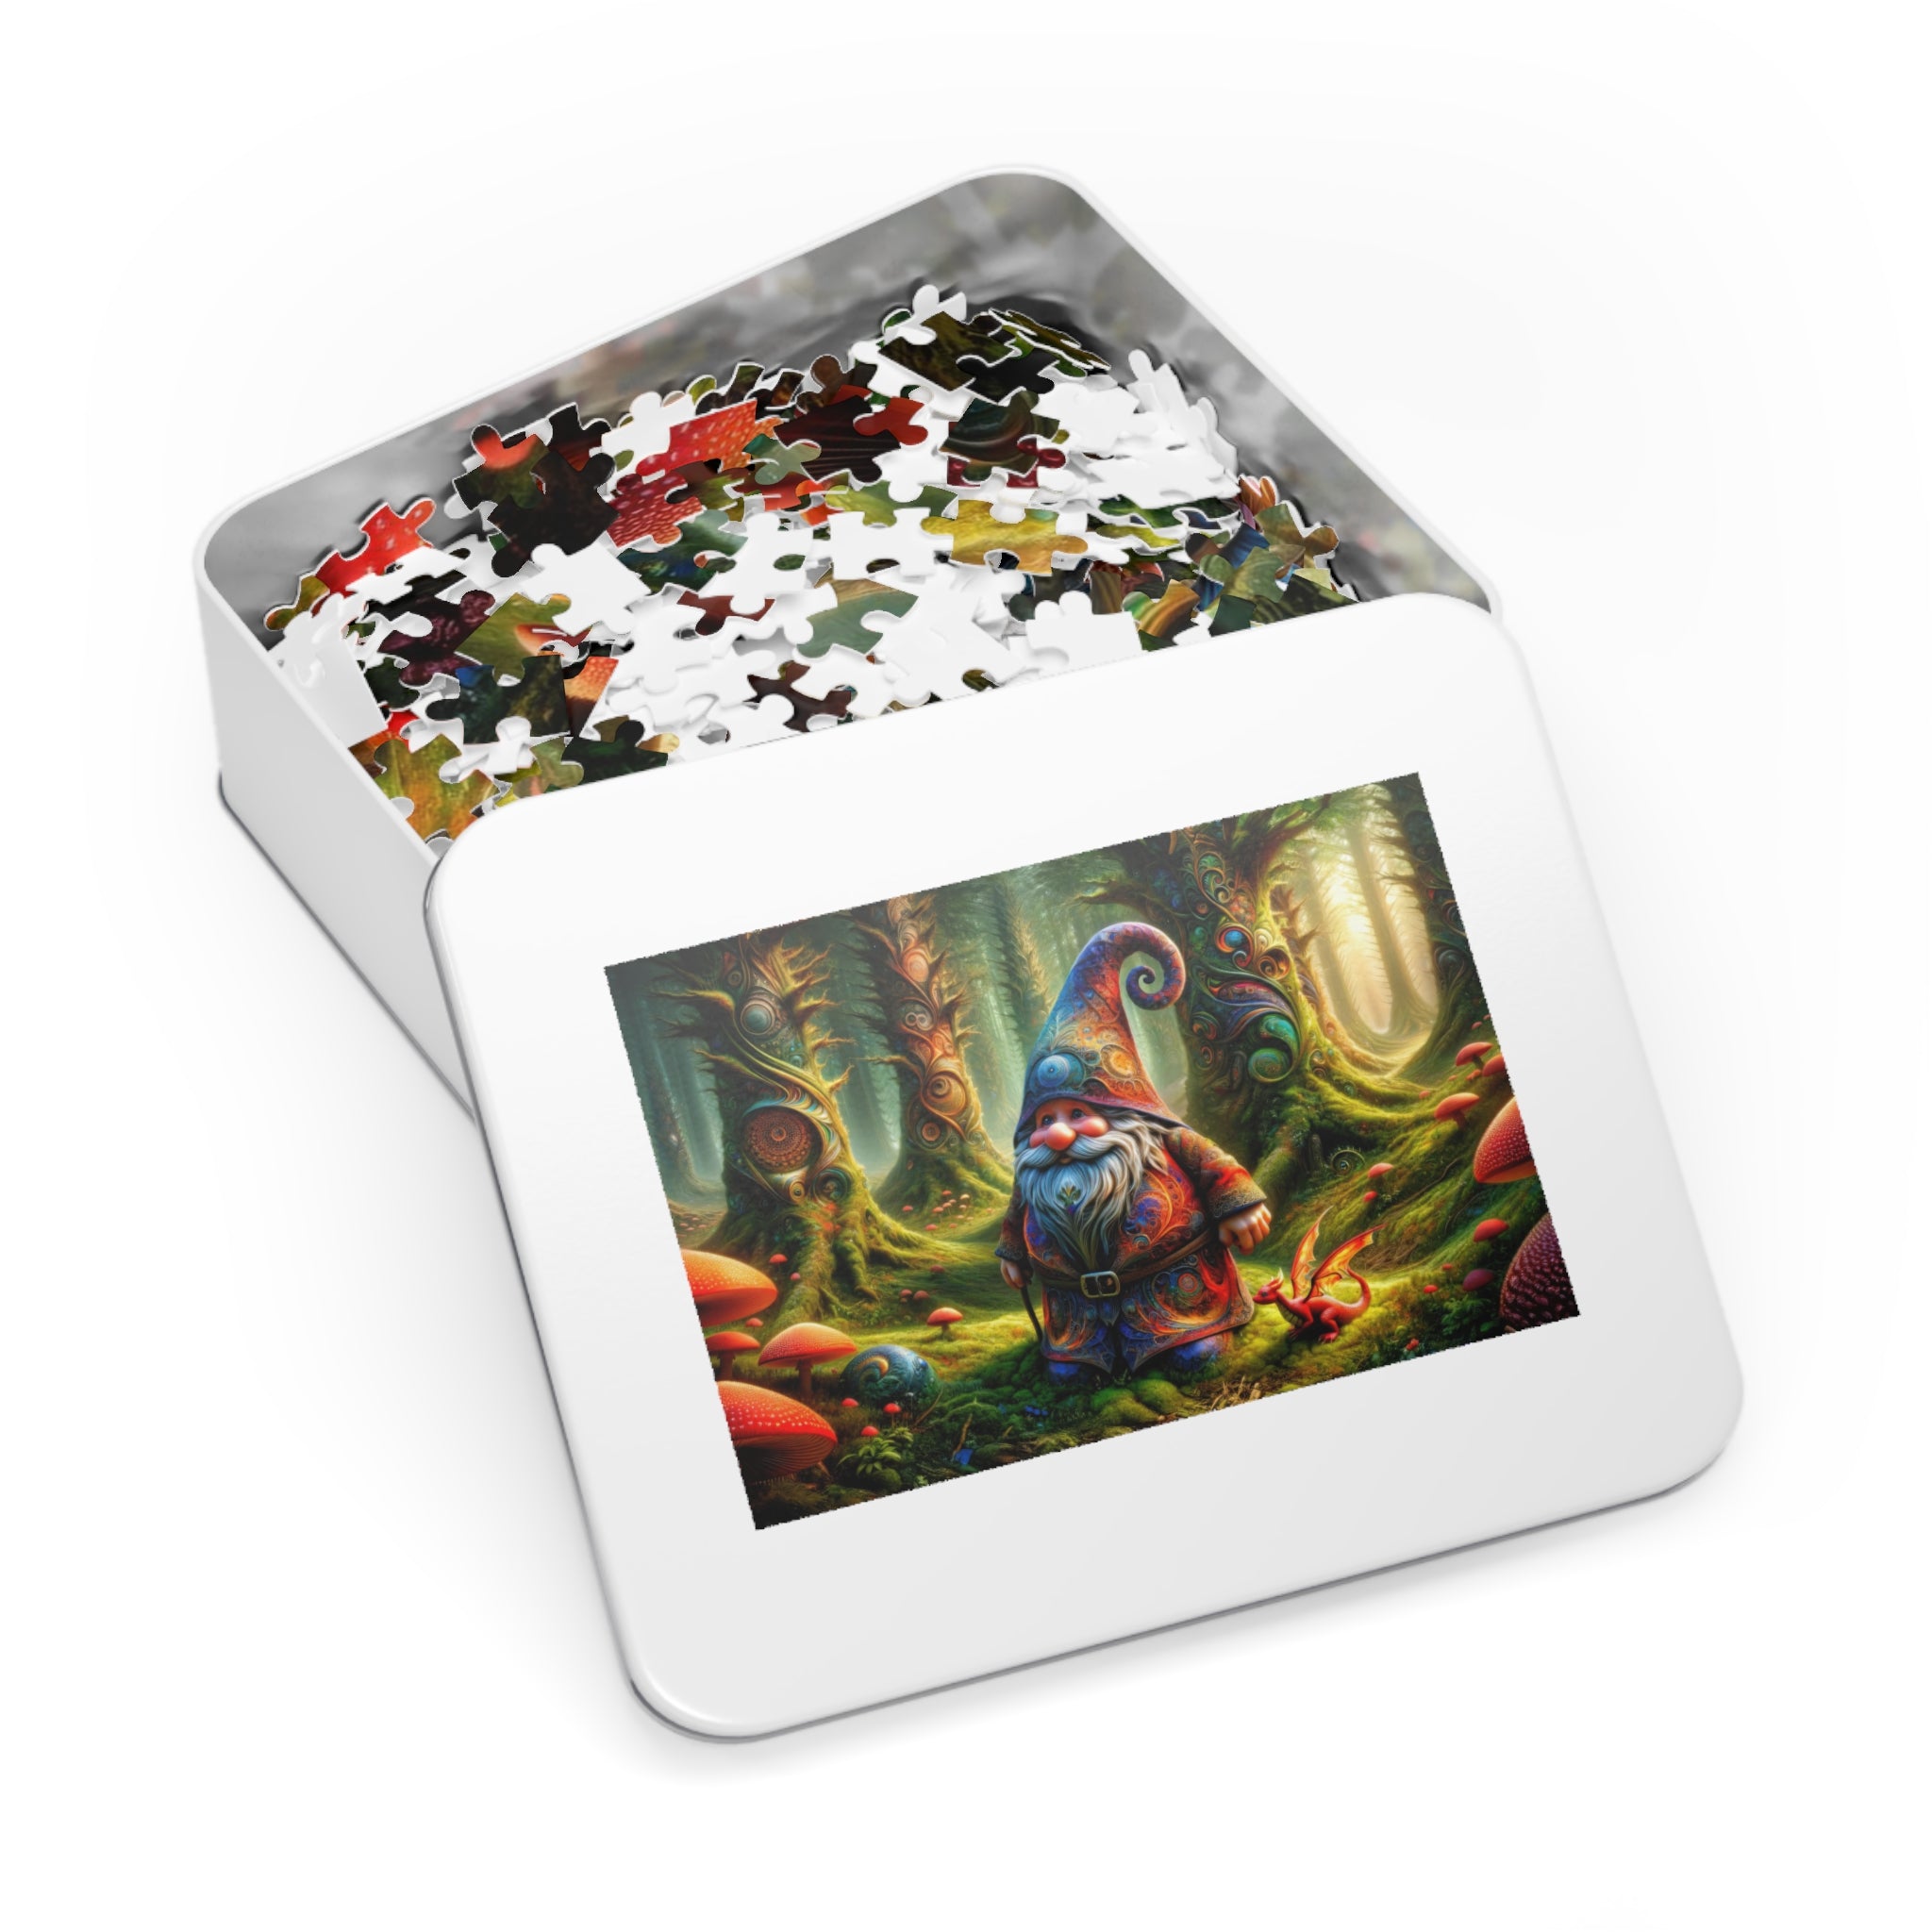 The Gnome's Fractal Forest Jigsaw Puzzle